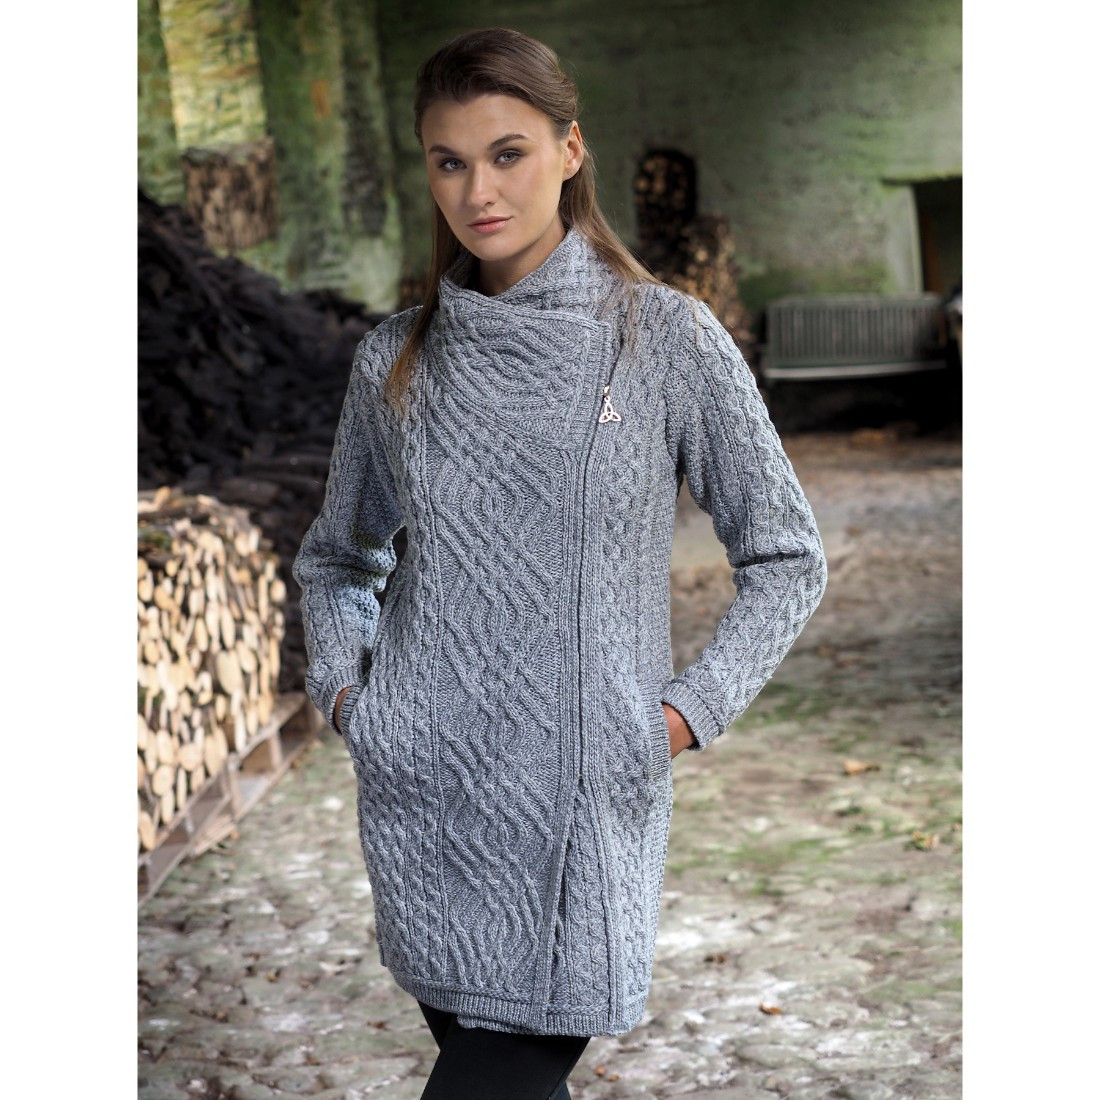 Knitted Coat Patterns Ladies Merino Wool Cable Knit Coat With Side Zip Grey Colour